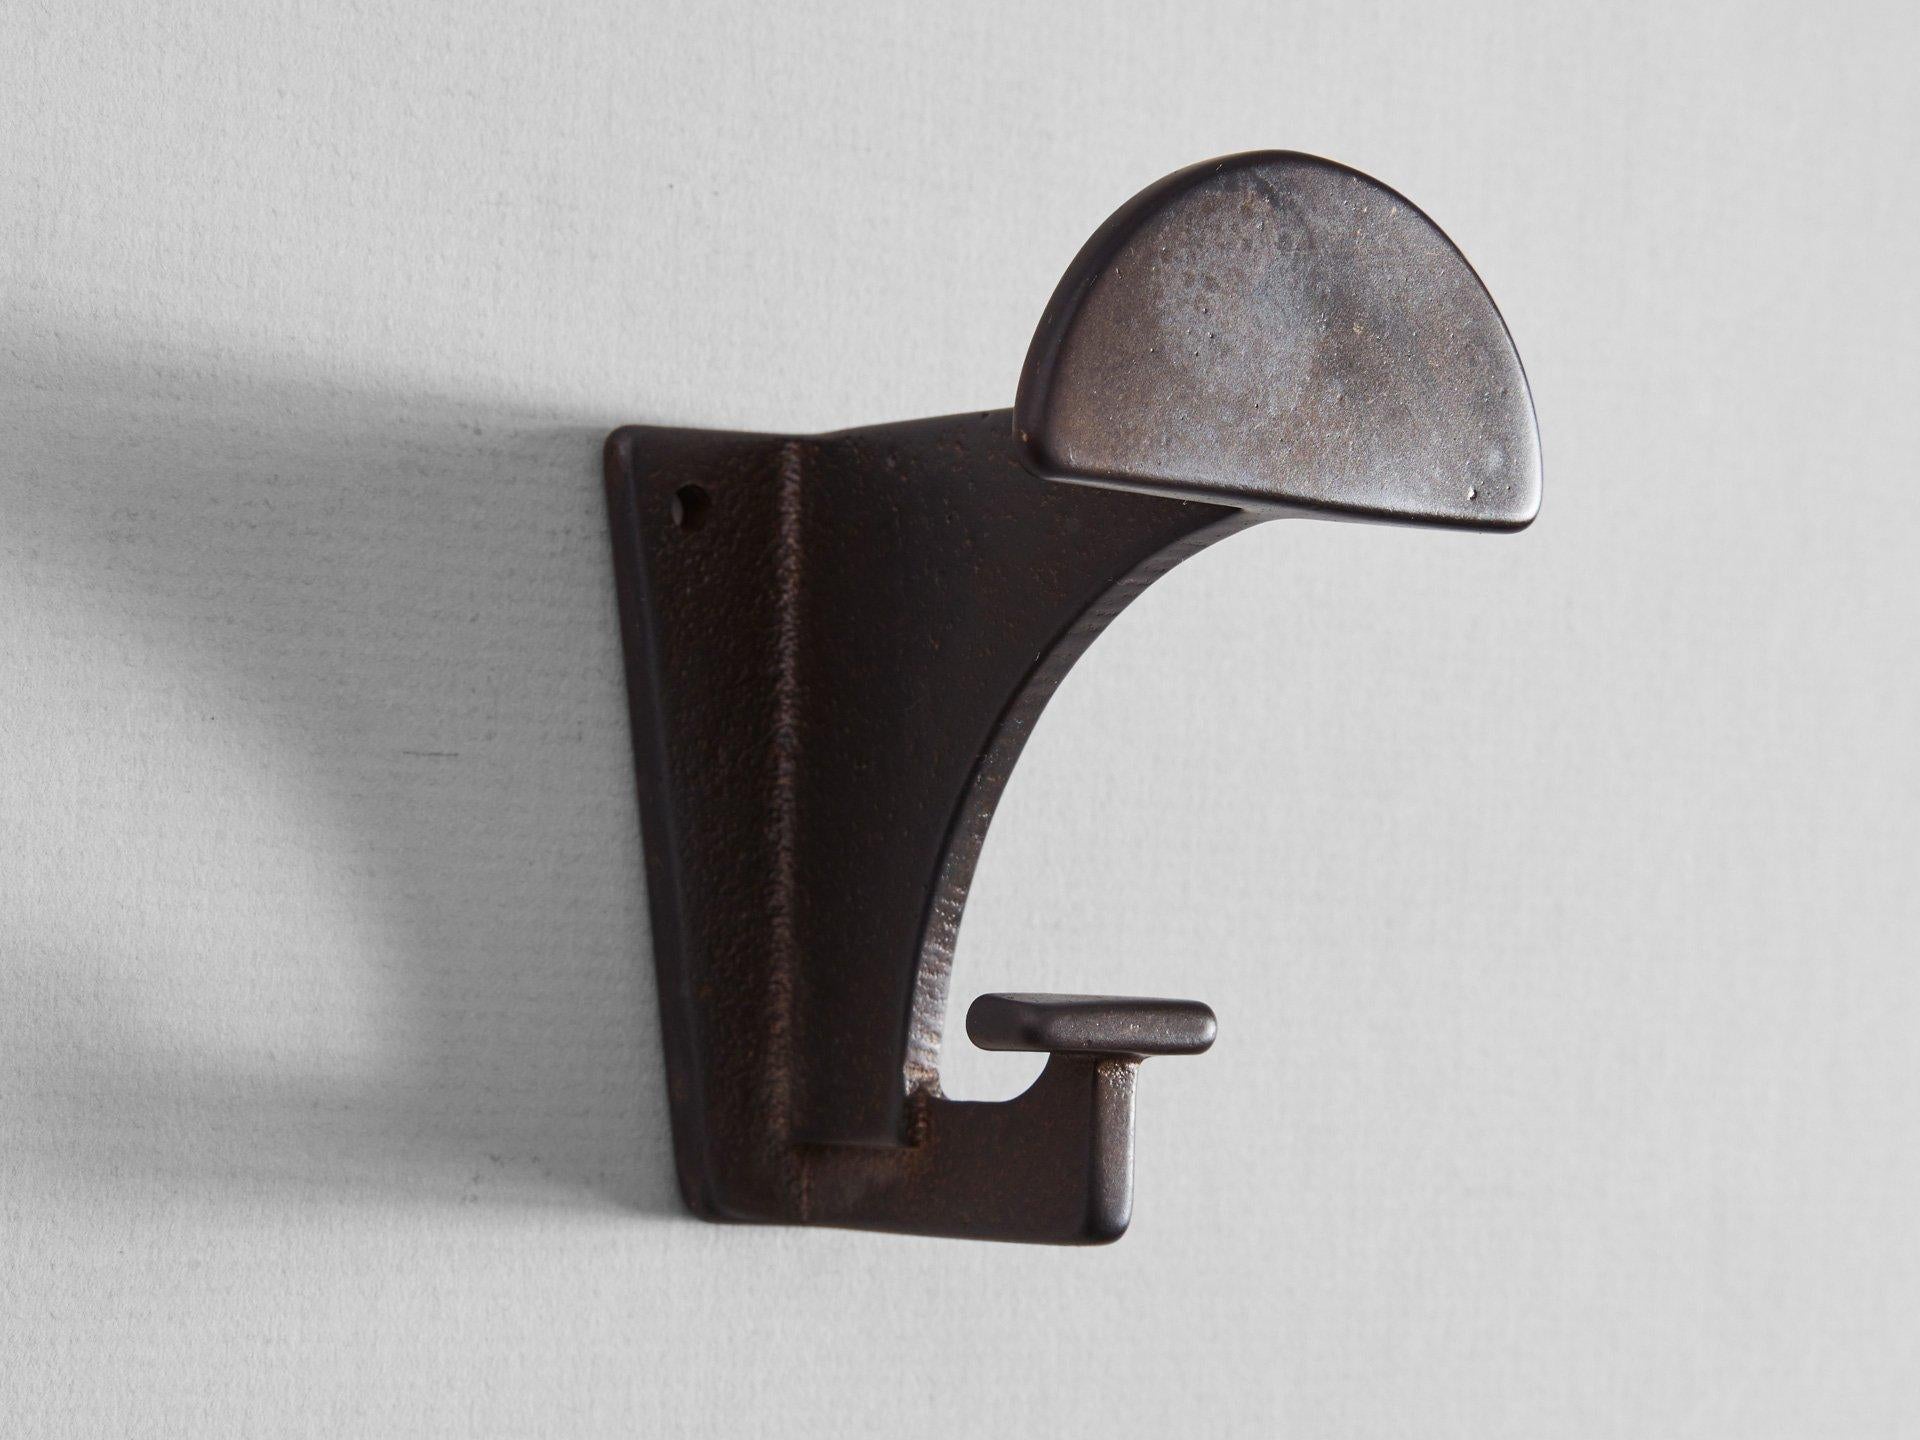 6 Dark bronze contemporary Hooks by Henry Wilson.
The blackened compass hook is made, finished and polished in Sydney, Australia using sand-casted gunmetal bronze. For its size, it can bear a surprisingly substantial heft.  

Sand-casting